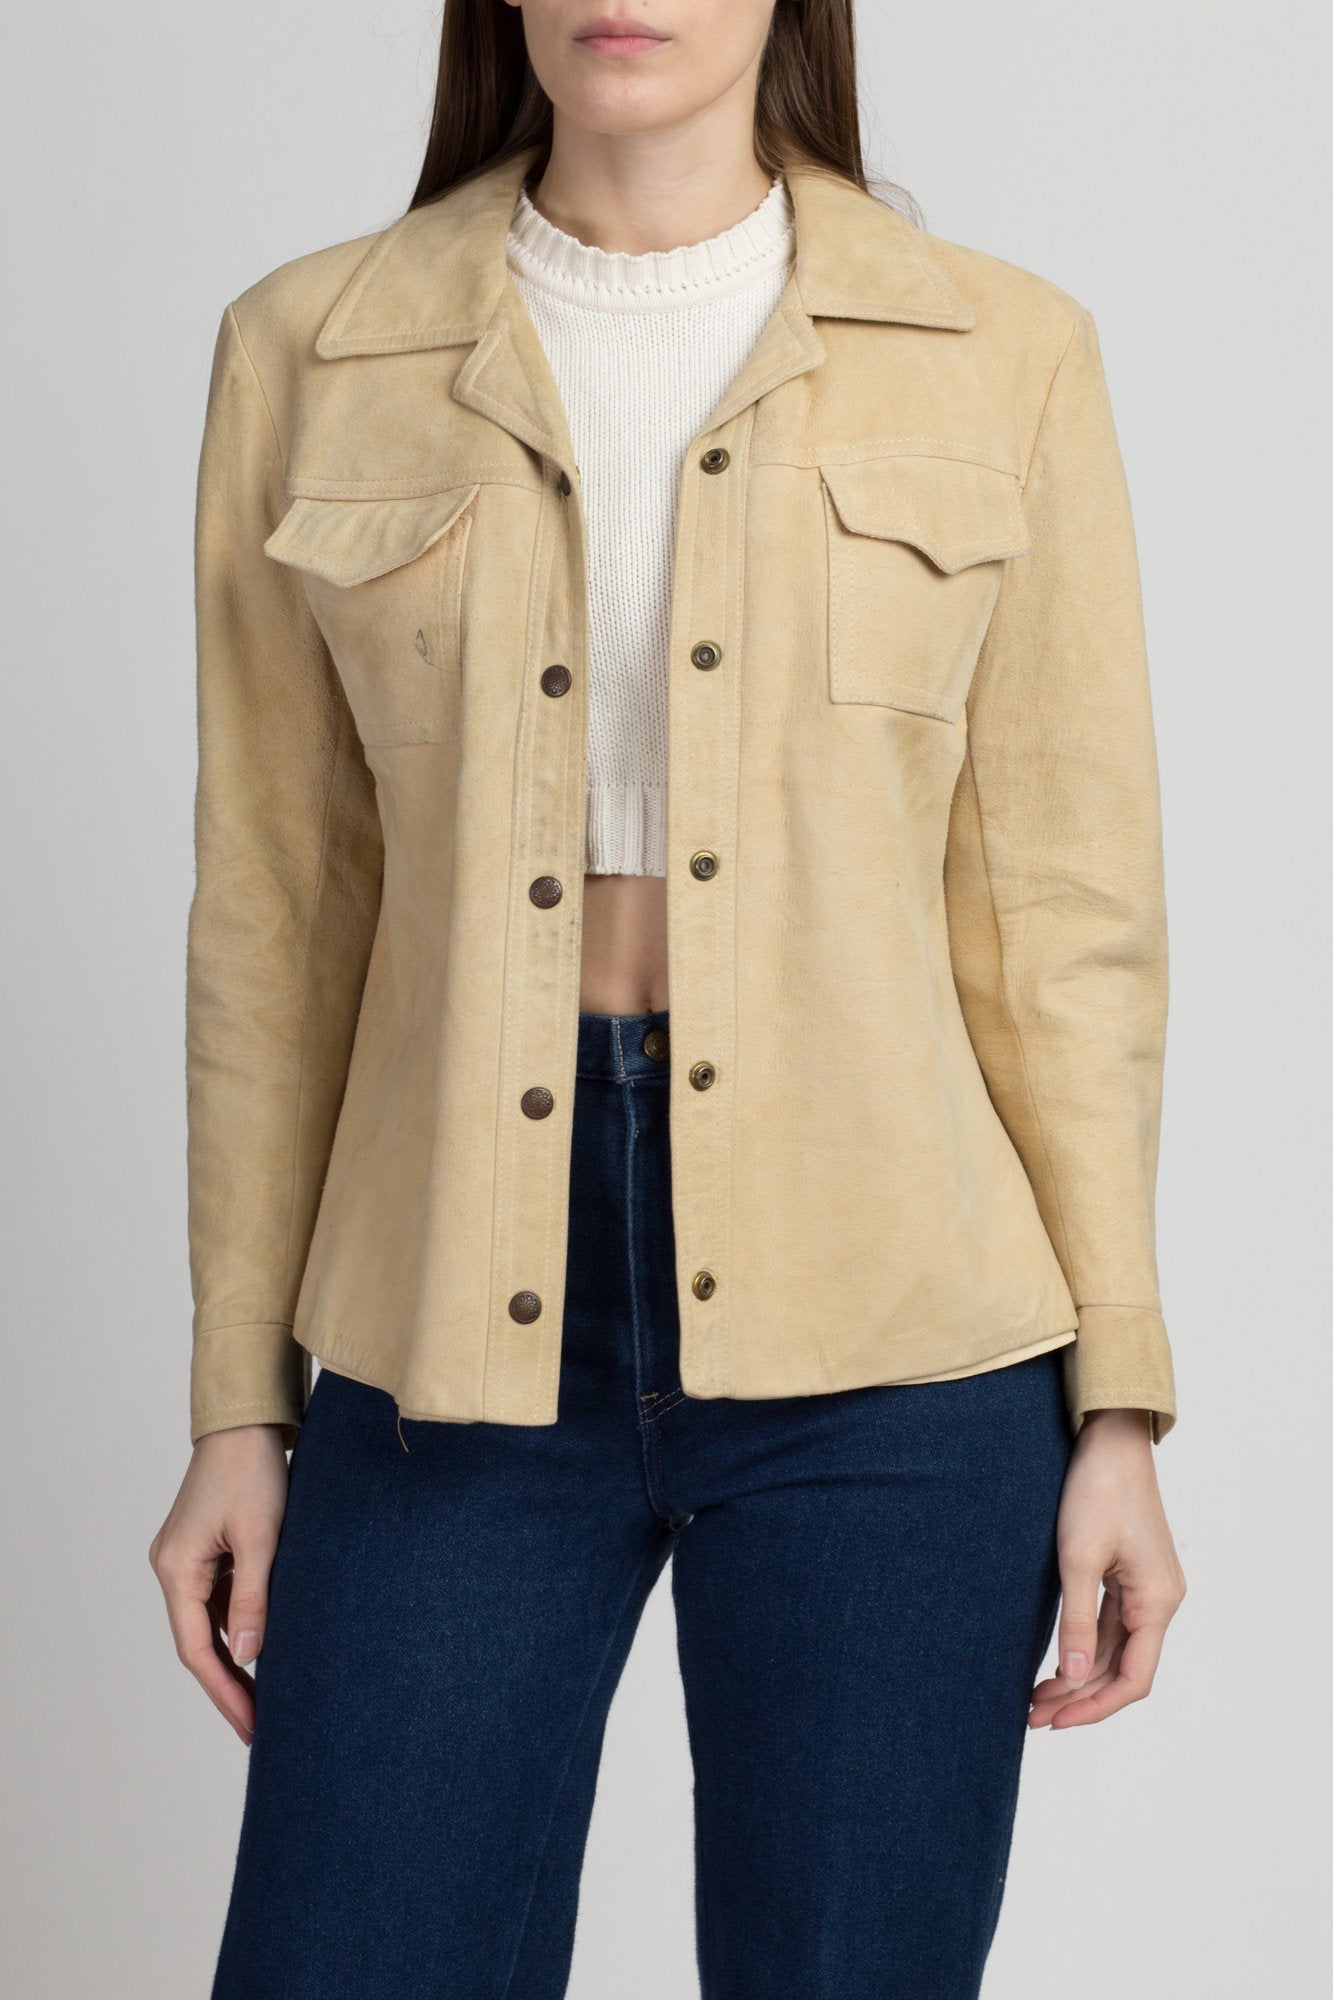 Vintage 60s Tan Suede Jacket - Small | 1960s Golden State Leather Snap Button Blazer